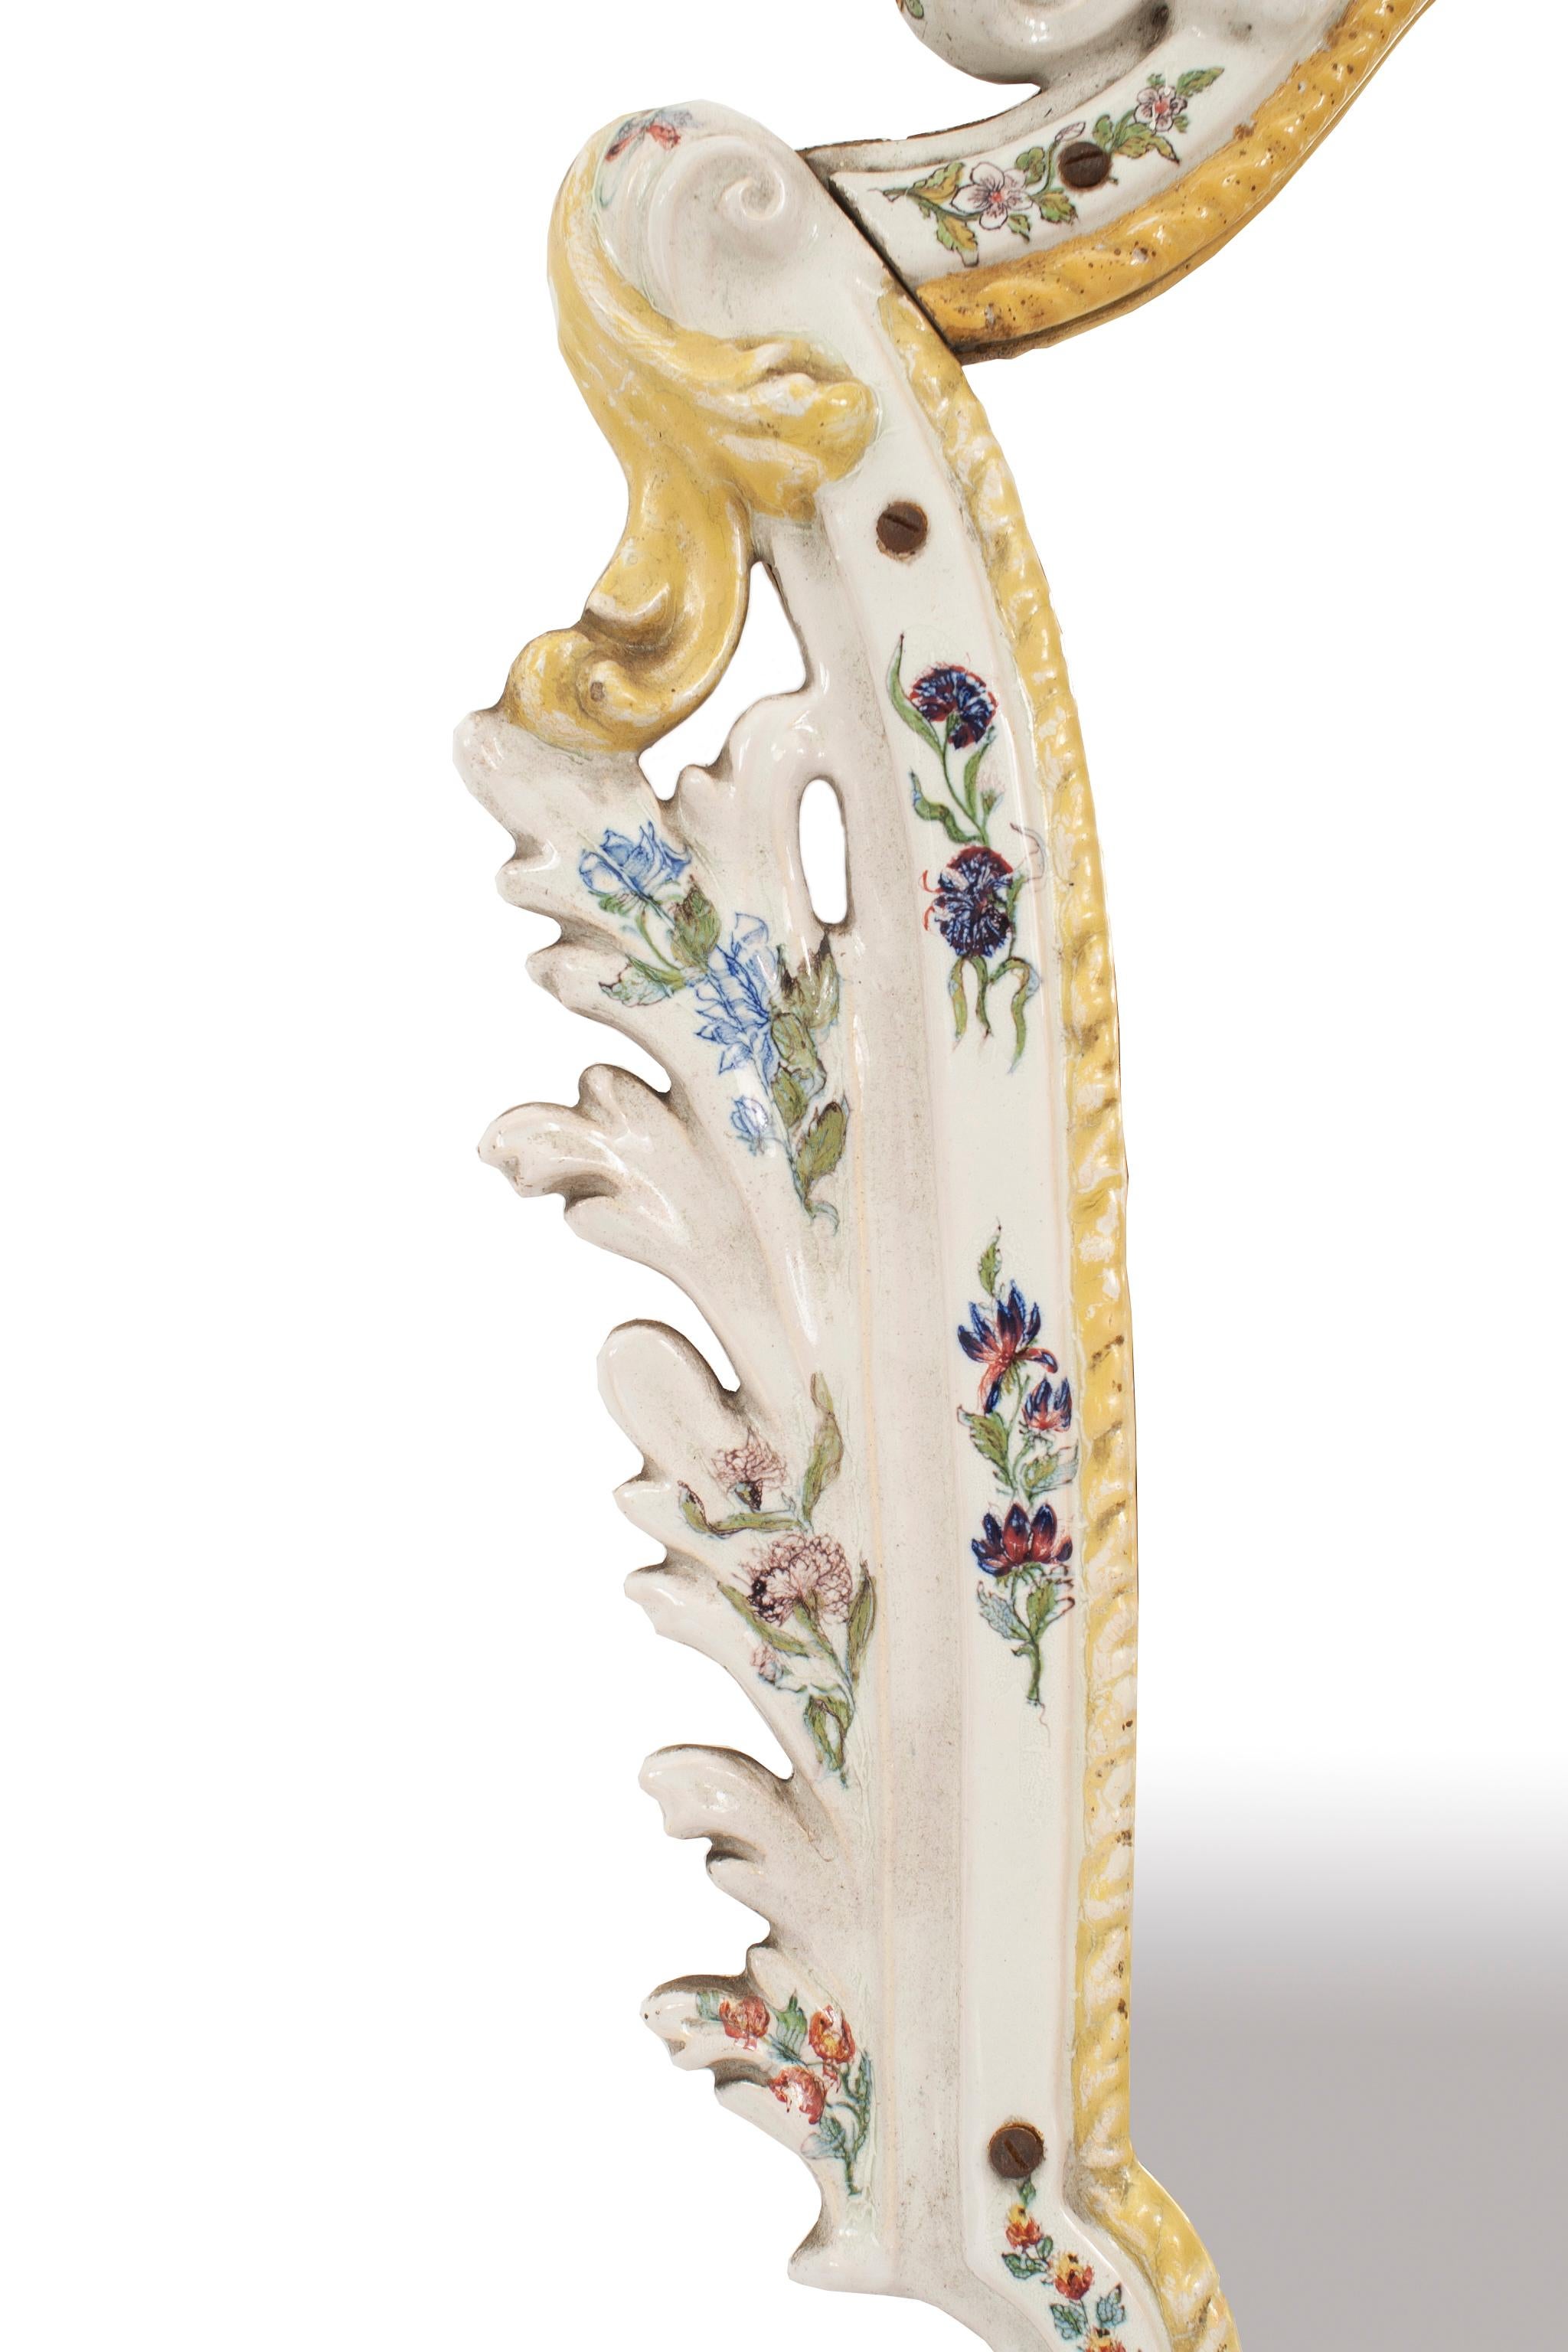 Continental, possibly German, '19th centurty' white porcelain keystone shaped wall mirror with yellow trim and floral decoration having a floral pediment (similar to VCG005).
 
  